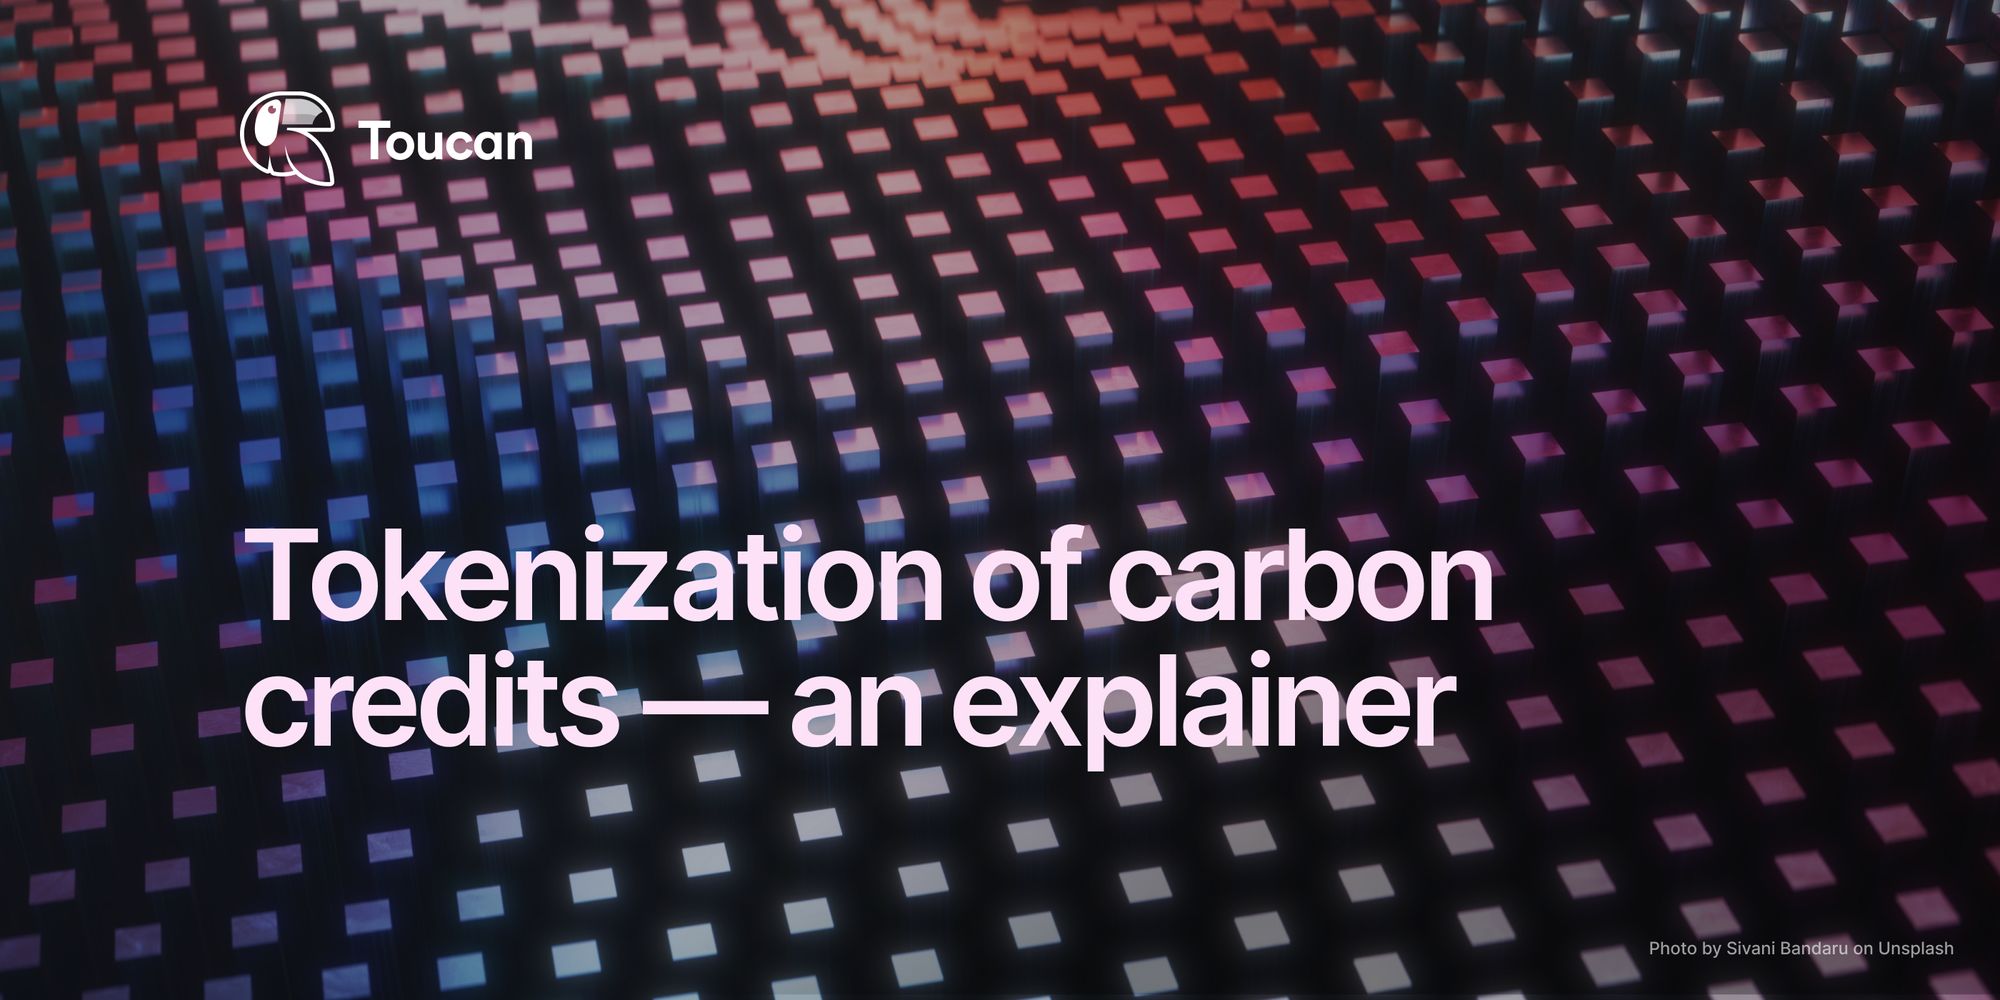 Tokenization of carbon credits — an explainer